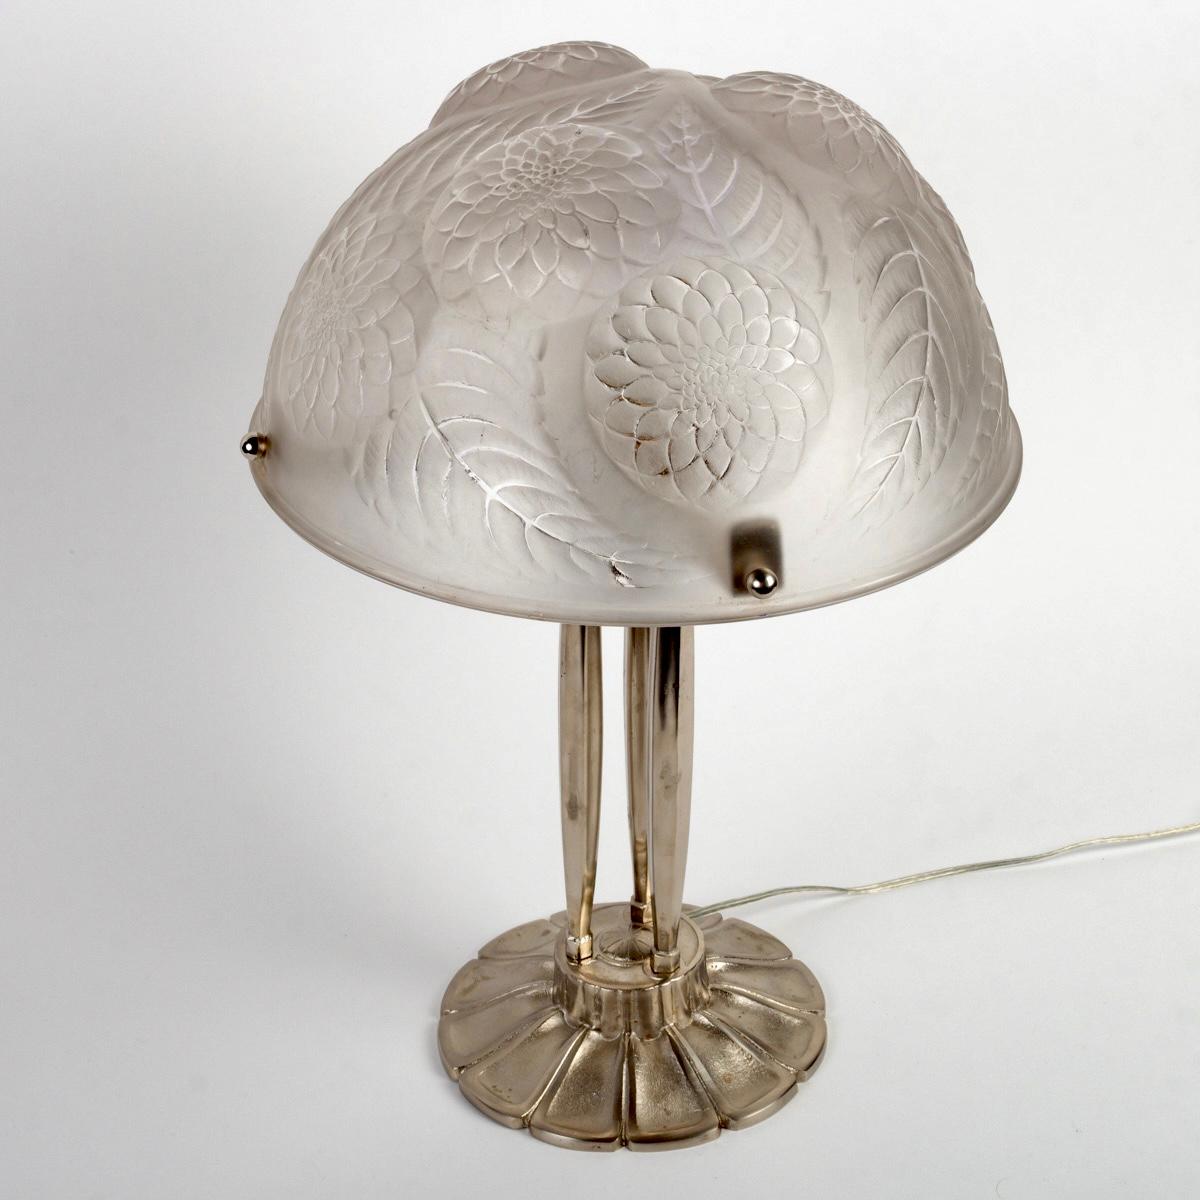 Early 20th Century 1921 René Lalique - Pair Of Lamps Dahlias Glass & Nickeled Bronze Feet